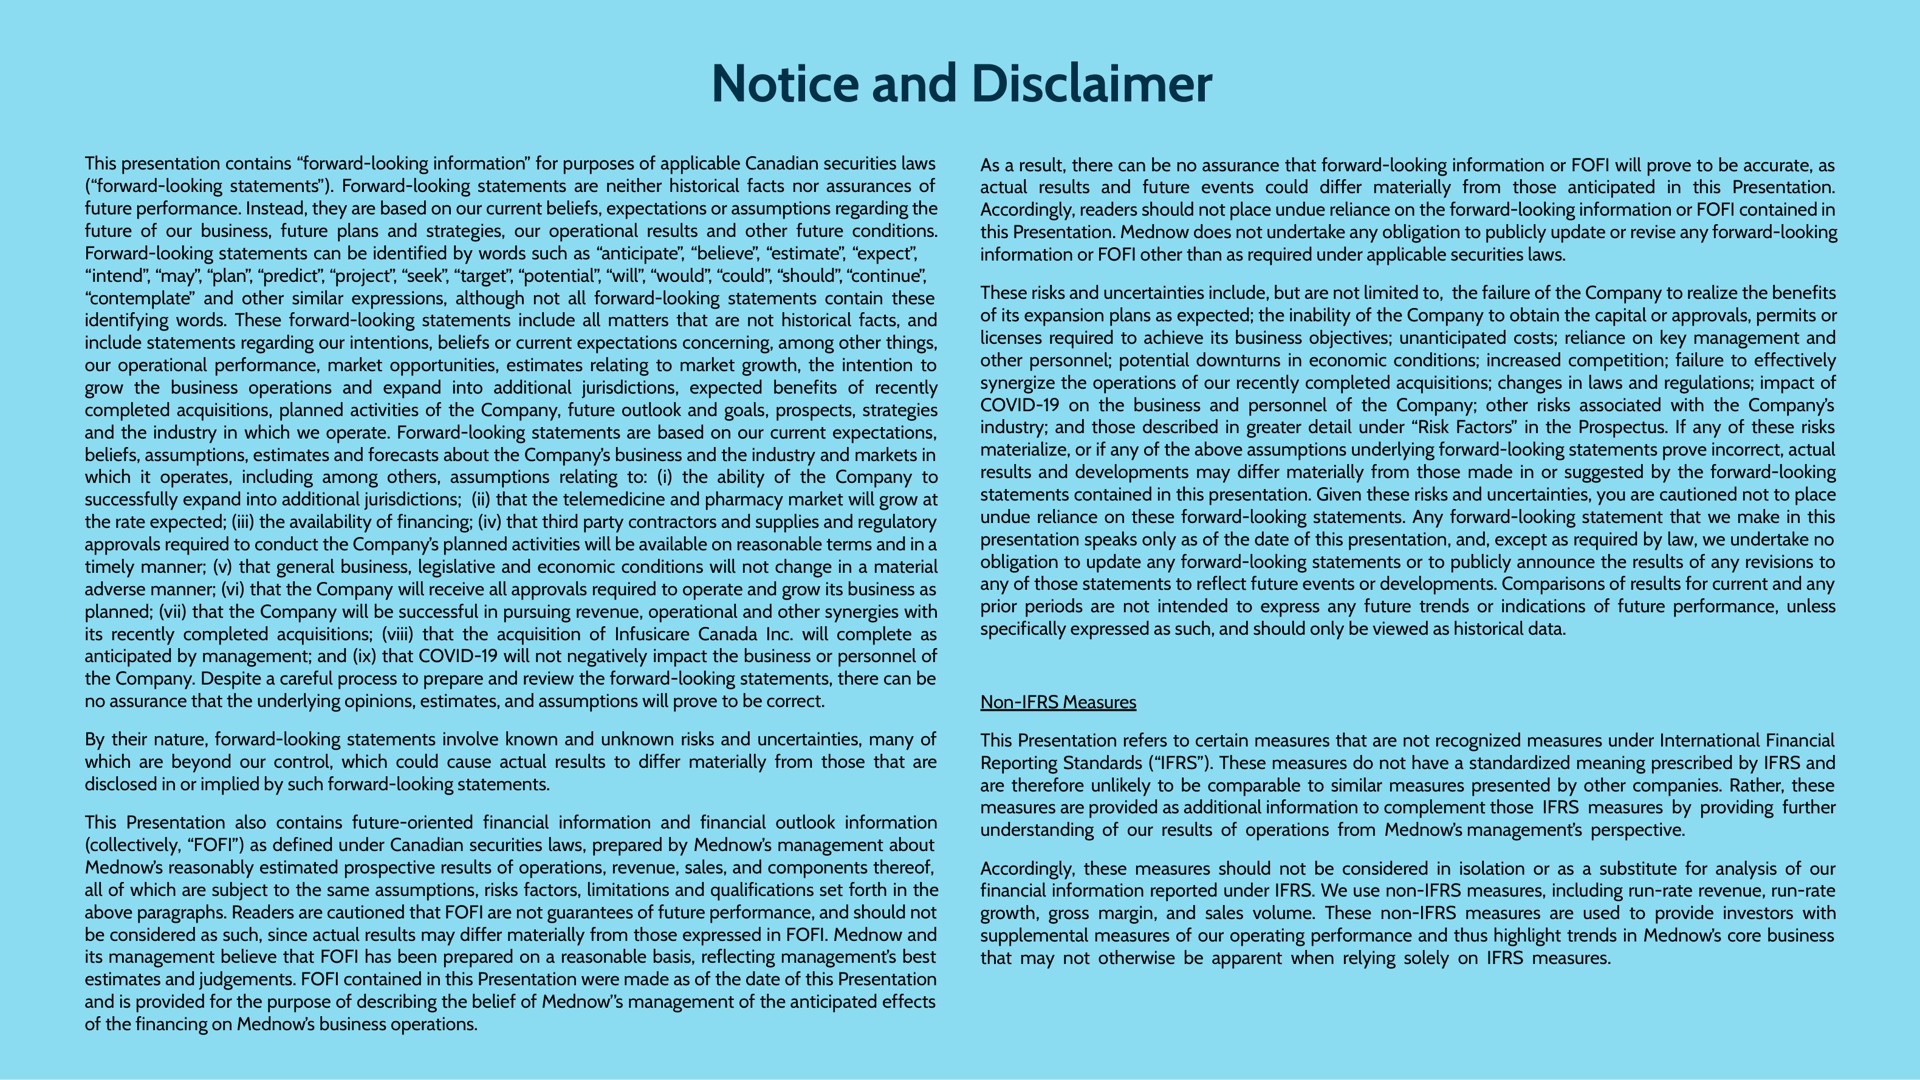 notice and disclaimer this presentation contains forward looking information for purposes of applicable securities laws forward looking statements forward looking statements are neither historical facts nor assurances of future performance instead they are based on our current beliefs expectations or assumptions regarding the future of our business future plans and strategies our operational results and other future conditions forward looking statements can be identified by words such as anticipate believe estimate expect intend may plan predict project seek target potential will would could should continue contemplate and other similar expressions although not all forward looking statements contain these identifying words these forward looking statements include all matters that are not historical facts and include statements regarding our intentions beliefs or current expectations concerning among other things our operational performance market opportunities estimates relating to market growth the intention to grow the business operations and expand into additional jurisdictions expected benefits of recently completed acquisitions planned activities of the company future outlook and goals prospects strategies and the industry in which we operate forward looking statements are based on our current expectations beliefs assumptions estimates and forecasts about the company business and the industry and markets in which it operates including among assumptions relating to i the ability of the company to successfully expand into additional jurisdictions that the and pharmacy market will grow at the rate expected the availability of financing that third party contractors and supplies and regulatory approvals required to conduct the company planned activities will be available on reasonable terms and in a timely manner that general business legislative and economic conditions will not change in a material adverse manner that the company will receive all approvals required to operate and grow its business as planned that the company will be successful in pursuing revenue operational and other synergies with its recently completed acquisitions that the acquisition of canada will complete as anticipated by management and that covid will not negatively impact the business or personnel of the company despite a careful process to prepare and review the forward looking statements there can be no assurance that the underlying opinions estimates and assumptions will prove to be correct by their nature forward looking statements involve known and unknown risks and uncertainties many of which are beyond our control which could cause actual results to differ materially from those that are disclosed in or implied by such forward looking statements this presentation also contains future oriented financial information and financial outlook information collectively as defined under securities laws prepared by management about reasonably estimated prospective results of operations revenue sales and components thereof all of which are subject to the same assumptions risks factors limitations and qualifications set forth in the above paragraphs readers are cautioned that are not guarantees of future performance and should not be considered as such since actual results may differ materially from those expressed in and its management believe that has been prepared on a reasonable basis reflecting management best estimates and contained in this presentation were made as of the date of this presentation and is provided for the purpose of describing the belief of management of the anticipated effects of the financing on business operations as a result there can be no assurance that forward looking information or will prove to be accurate as actual results and future events could differ materially from those anticipated in this presentation accordingly readers should not place undue reliance on the forward looking information or contained in this presentation does not undertake any obligation to publicly update or revise any forward looking information or other than as required under applicable securities laws these risks and uncertainties include but are not limited to the failure of the company to realize the benefits of its expansion plans as expected the inability of the company to obtain the capital or approvals permits or licenses required to achieve its business objectives unanticipated costs reliance on key management and other personnel potential downturns in economic conditions increased competition failure to effectively synergize the operations of our recently completed acquisitions changes in laws and regulations impact of covid on the business and personnel of the company other risks associated with the company industry and those described in greater detail under risk factors in the prospectus if any of these risks materialize or if any of the above assumptions underlying forward looking statements prove incorrect actual results and developments may differ materially from those made in or suggested by the forward looking statements contained in this presentation given these risks and uncertainties you are cautioned not to place undue reliance on these forward looking statements any forward looking statement that we make in this presentation speaks only as of the date of this presentation and except as required by law we undertake no obligation to update any forward looking statements or to publicly announce the results of any revisions to any of those statements to reflect future events or developments comparisons of results for current and any prior periods are not intended to express any future trends or indications of future performance unless specifically expressed as such and should only be viewed as historical data non measures this presentation refers to certain measures that are not recognized measures under international financial reporting standards these measures do not have a standardized meaning prescribed by and are therefore unlikely to be comparable to similar measures presented by other companies rather these measures are provided as additional information to complement those measures by providing further understanding of our results of operations from management perspective accordingly these measures should not be considered in isolation or as a substitute for analysis of our financial information reported under we use non measures including run rate revenue run rate growth gross margin and sales volume these non measures are used to provide investors with supplemental measures of our operating performance and thus highlight trends in core business that may not otherwise be apparent when relying solely on measures | Mednow